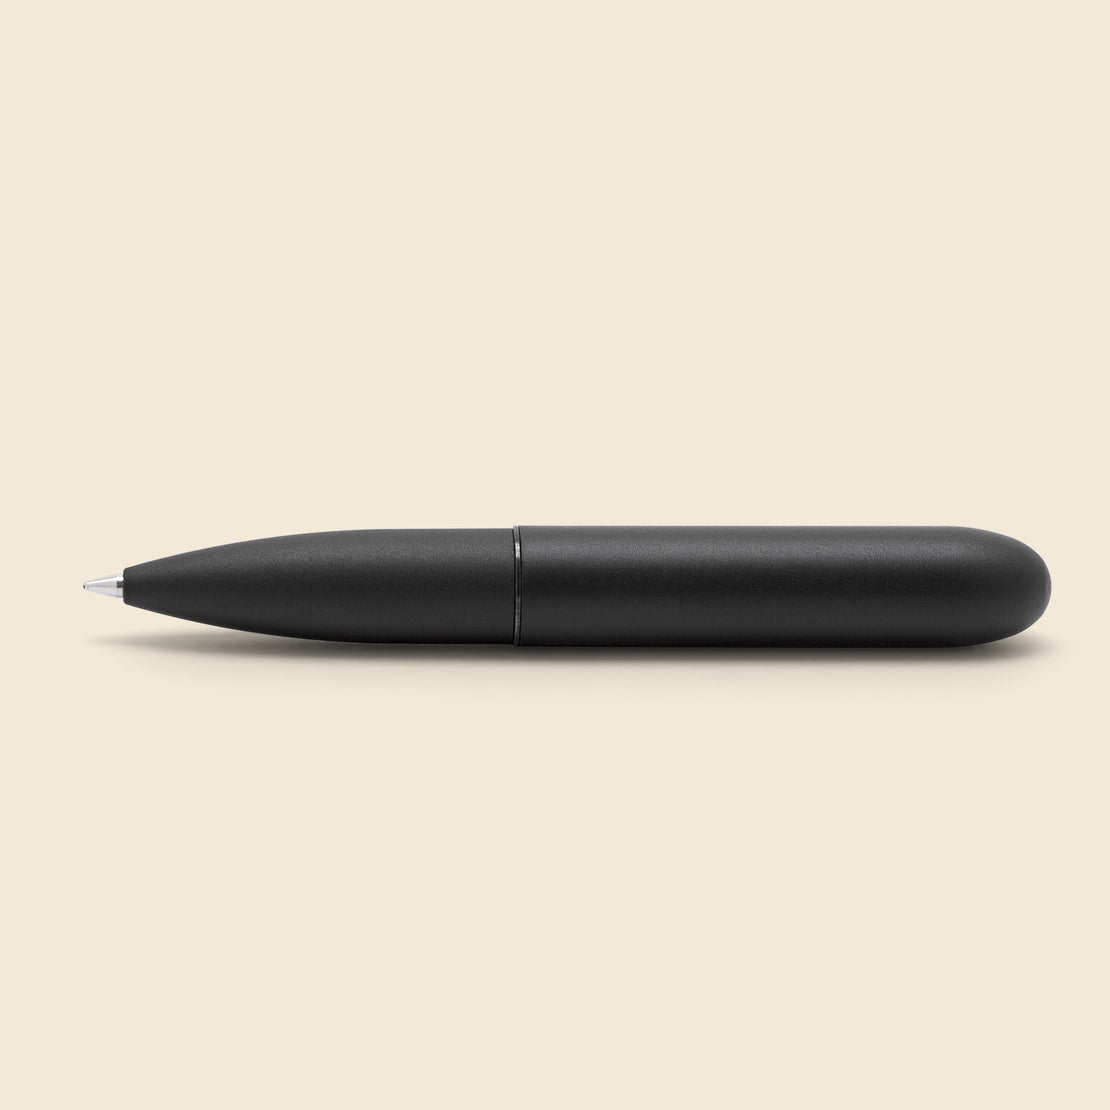 Bullet Pen - Black - Paper Goods - STAG Provisions - Home - Office - Paper Goods